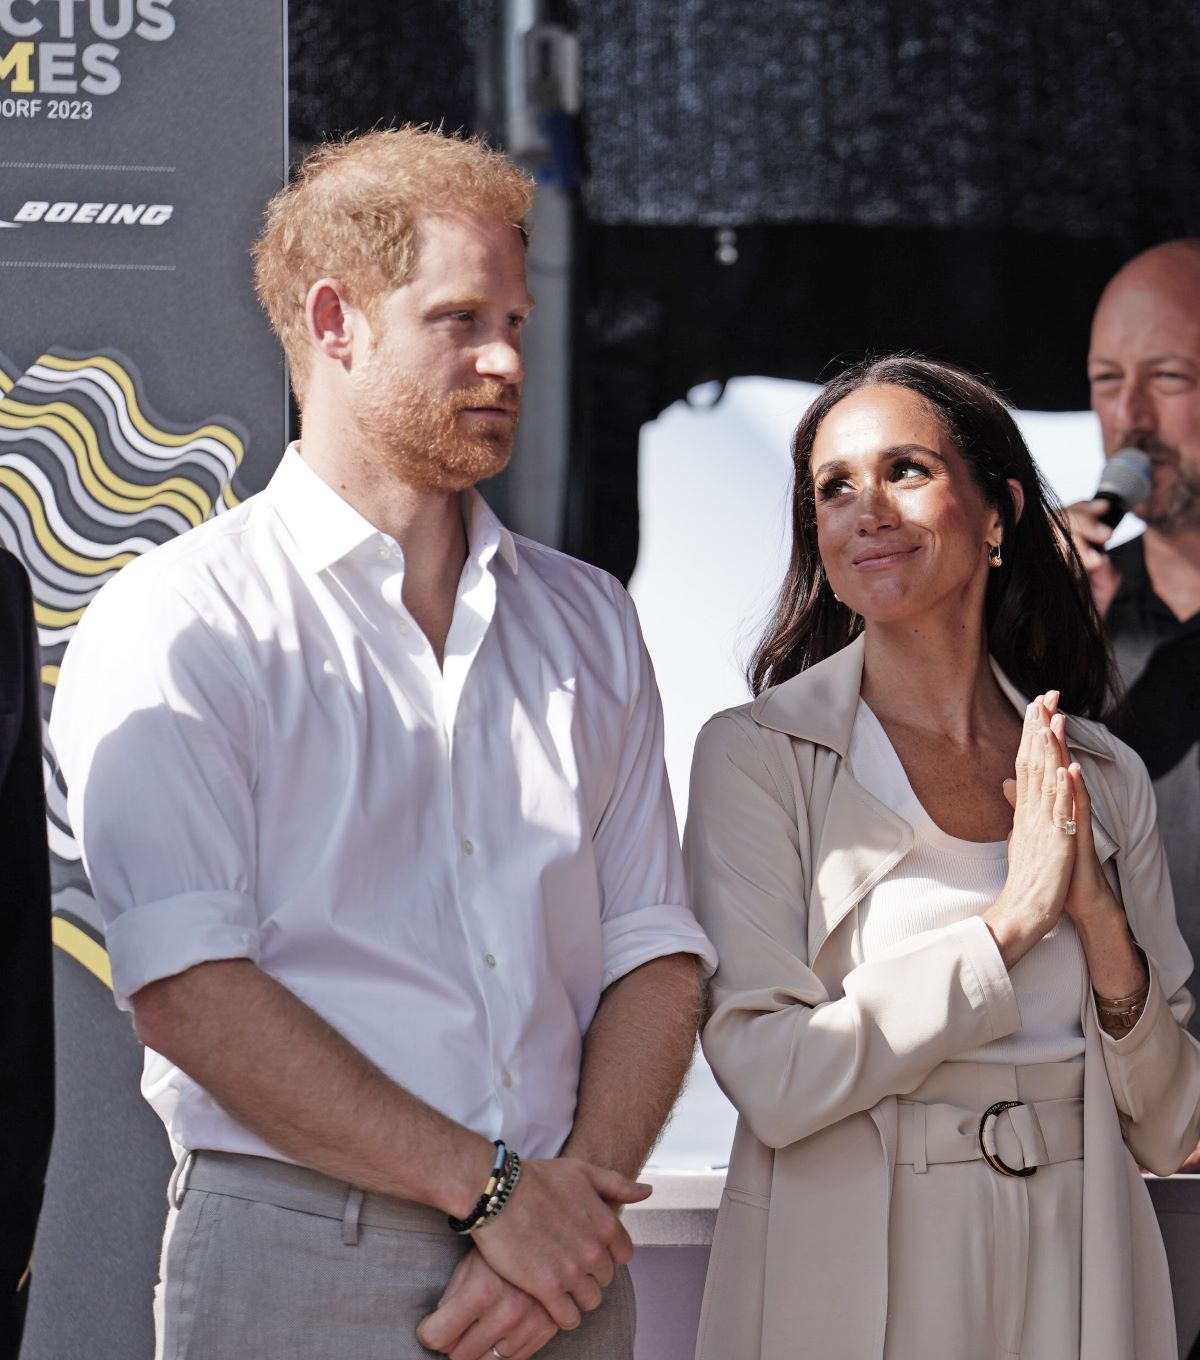 Prince Harry and Meghan Markle during a medal ceremony at the Invictus Games in Dusseldorf, Germany